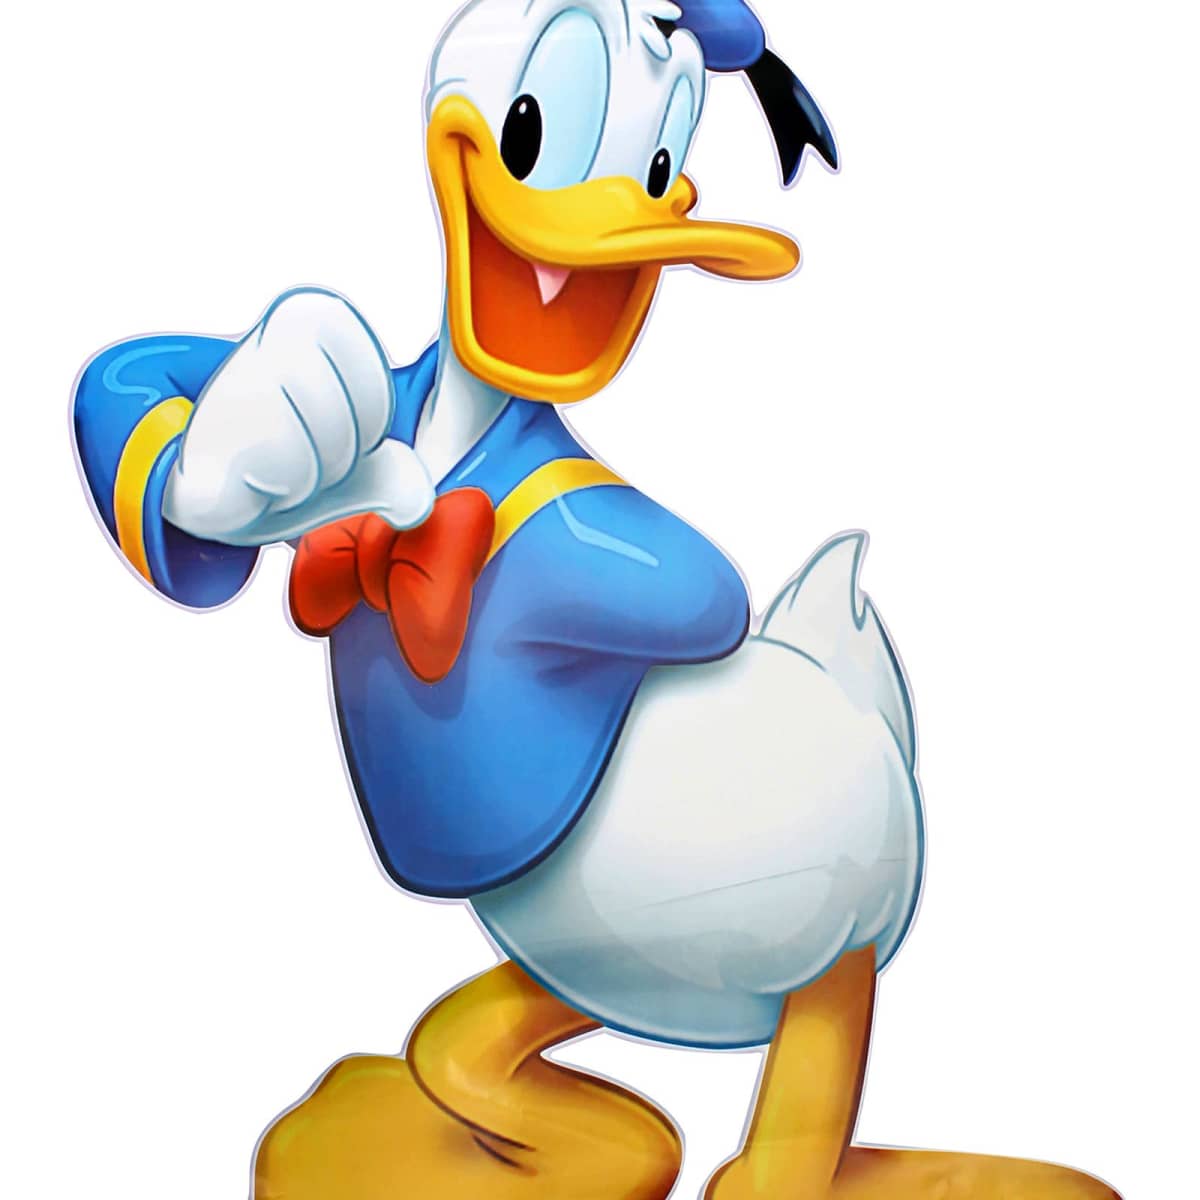 What People Don't Know About Donald Duck - ReelRundown